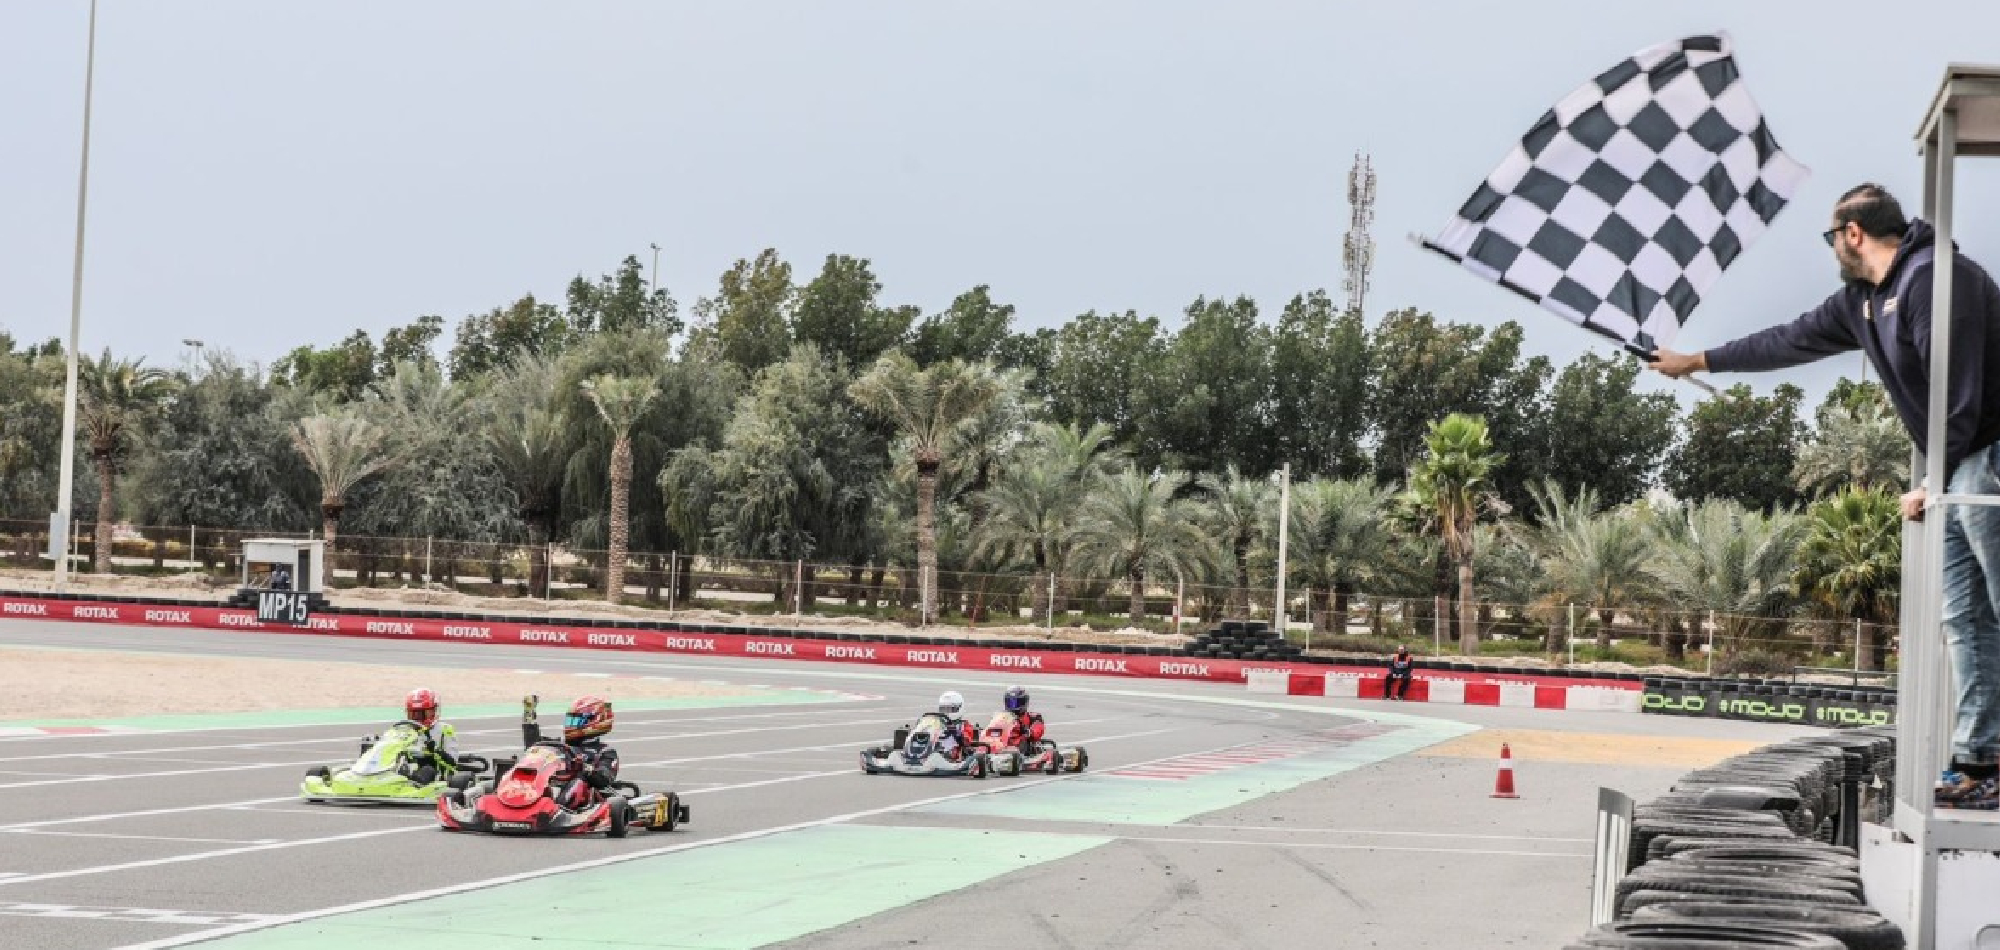 QMA drivers excel at Rotax Challenge in Bahrain